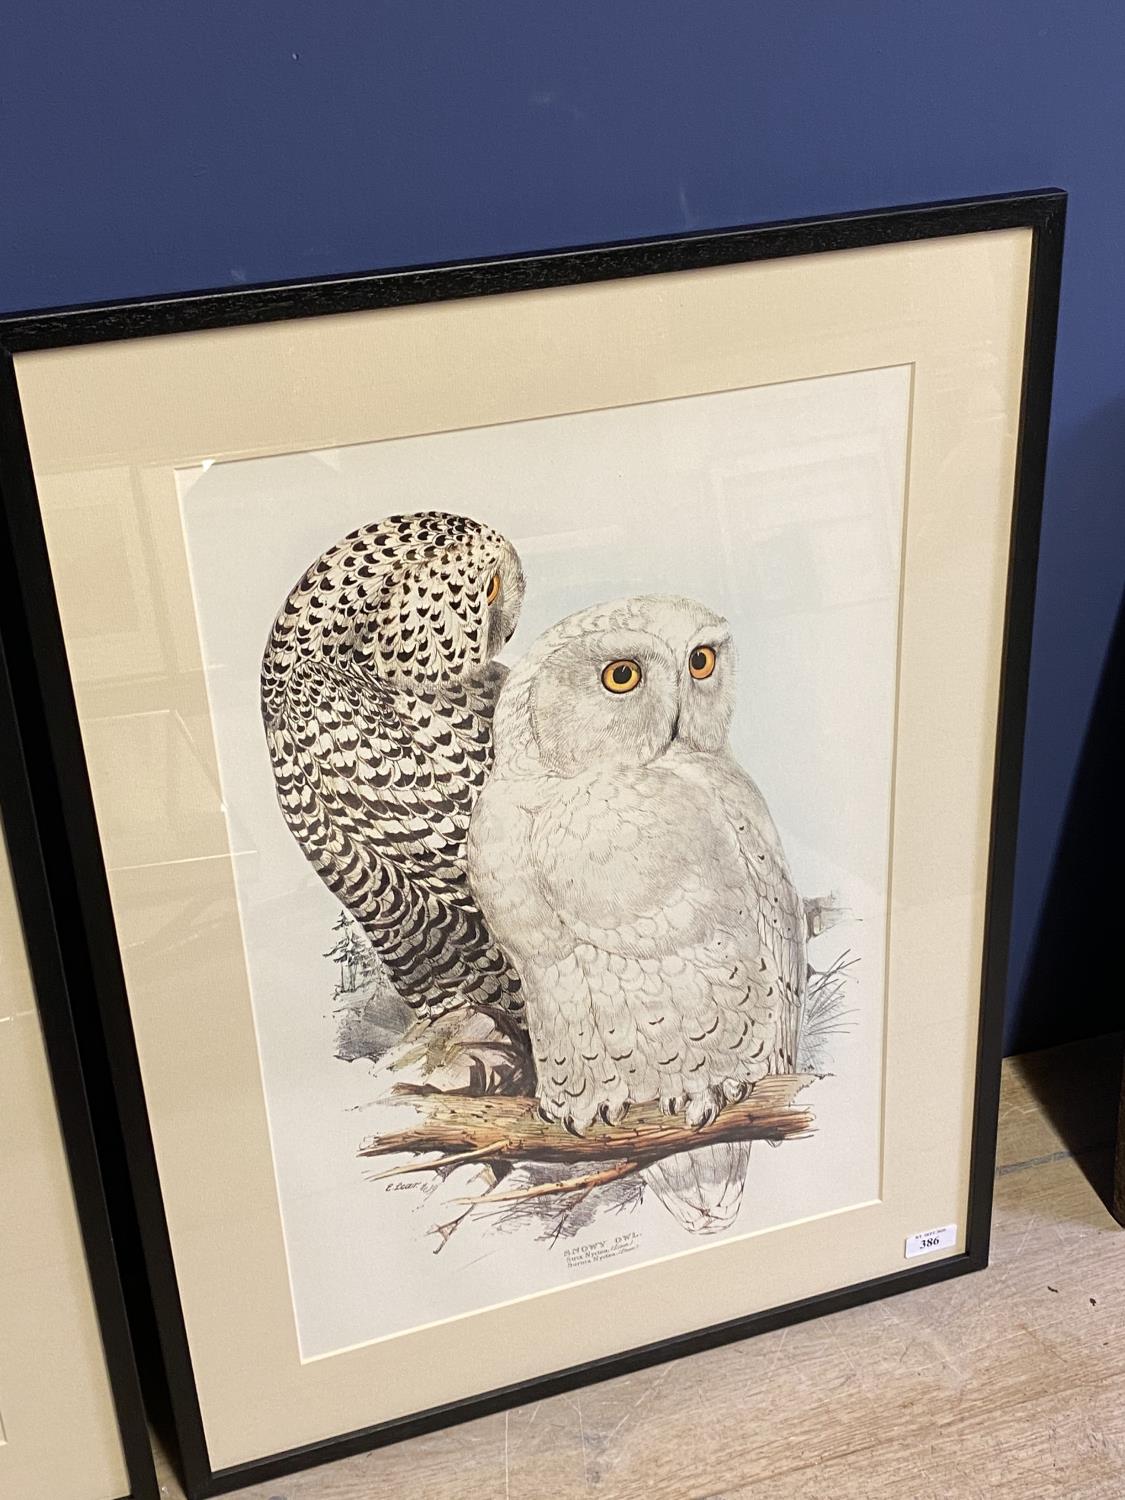 AFTER Edward Lear (1812-1888) Set of 3 prints of hand coloured lithographs of owls - Image 4 of 4